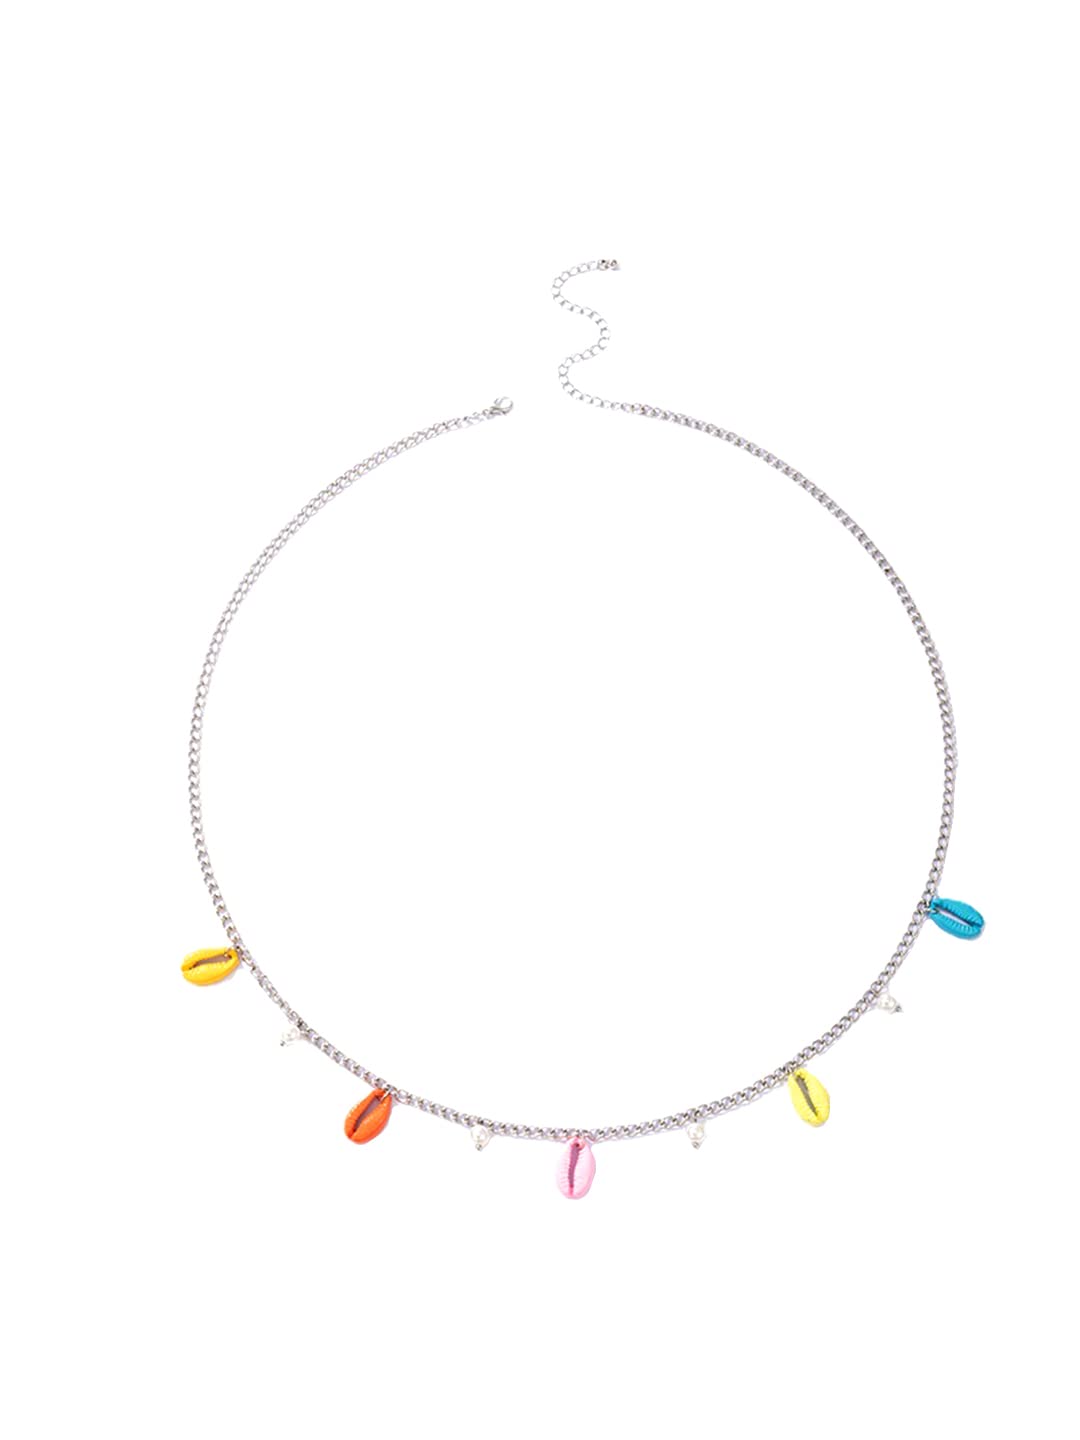 Yellow Chimes Waist Chain for Women and Girls Fashion Hip Chain for Women | Silver Toned Pearl Drop Beach Wear Designed Waist Chain | Birthday Gift for girls and women